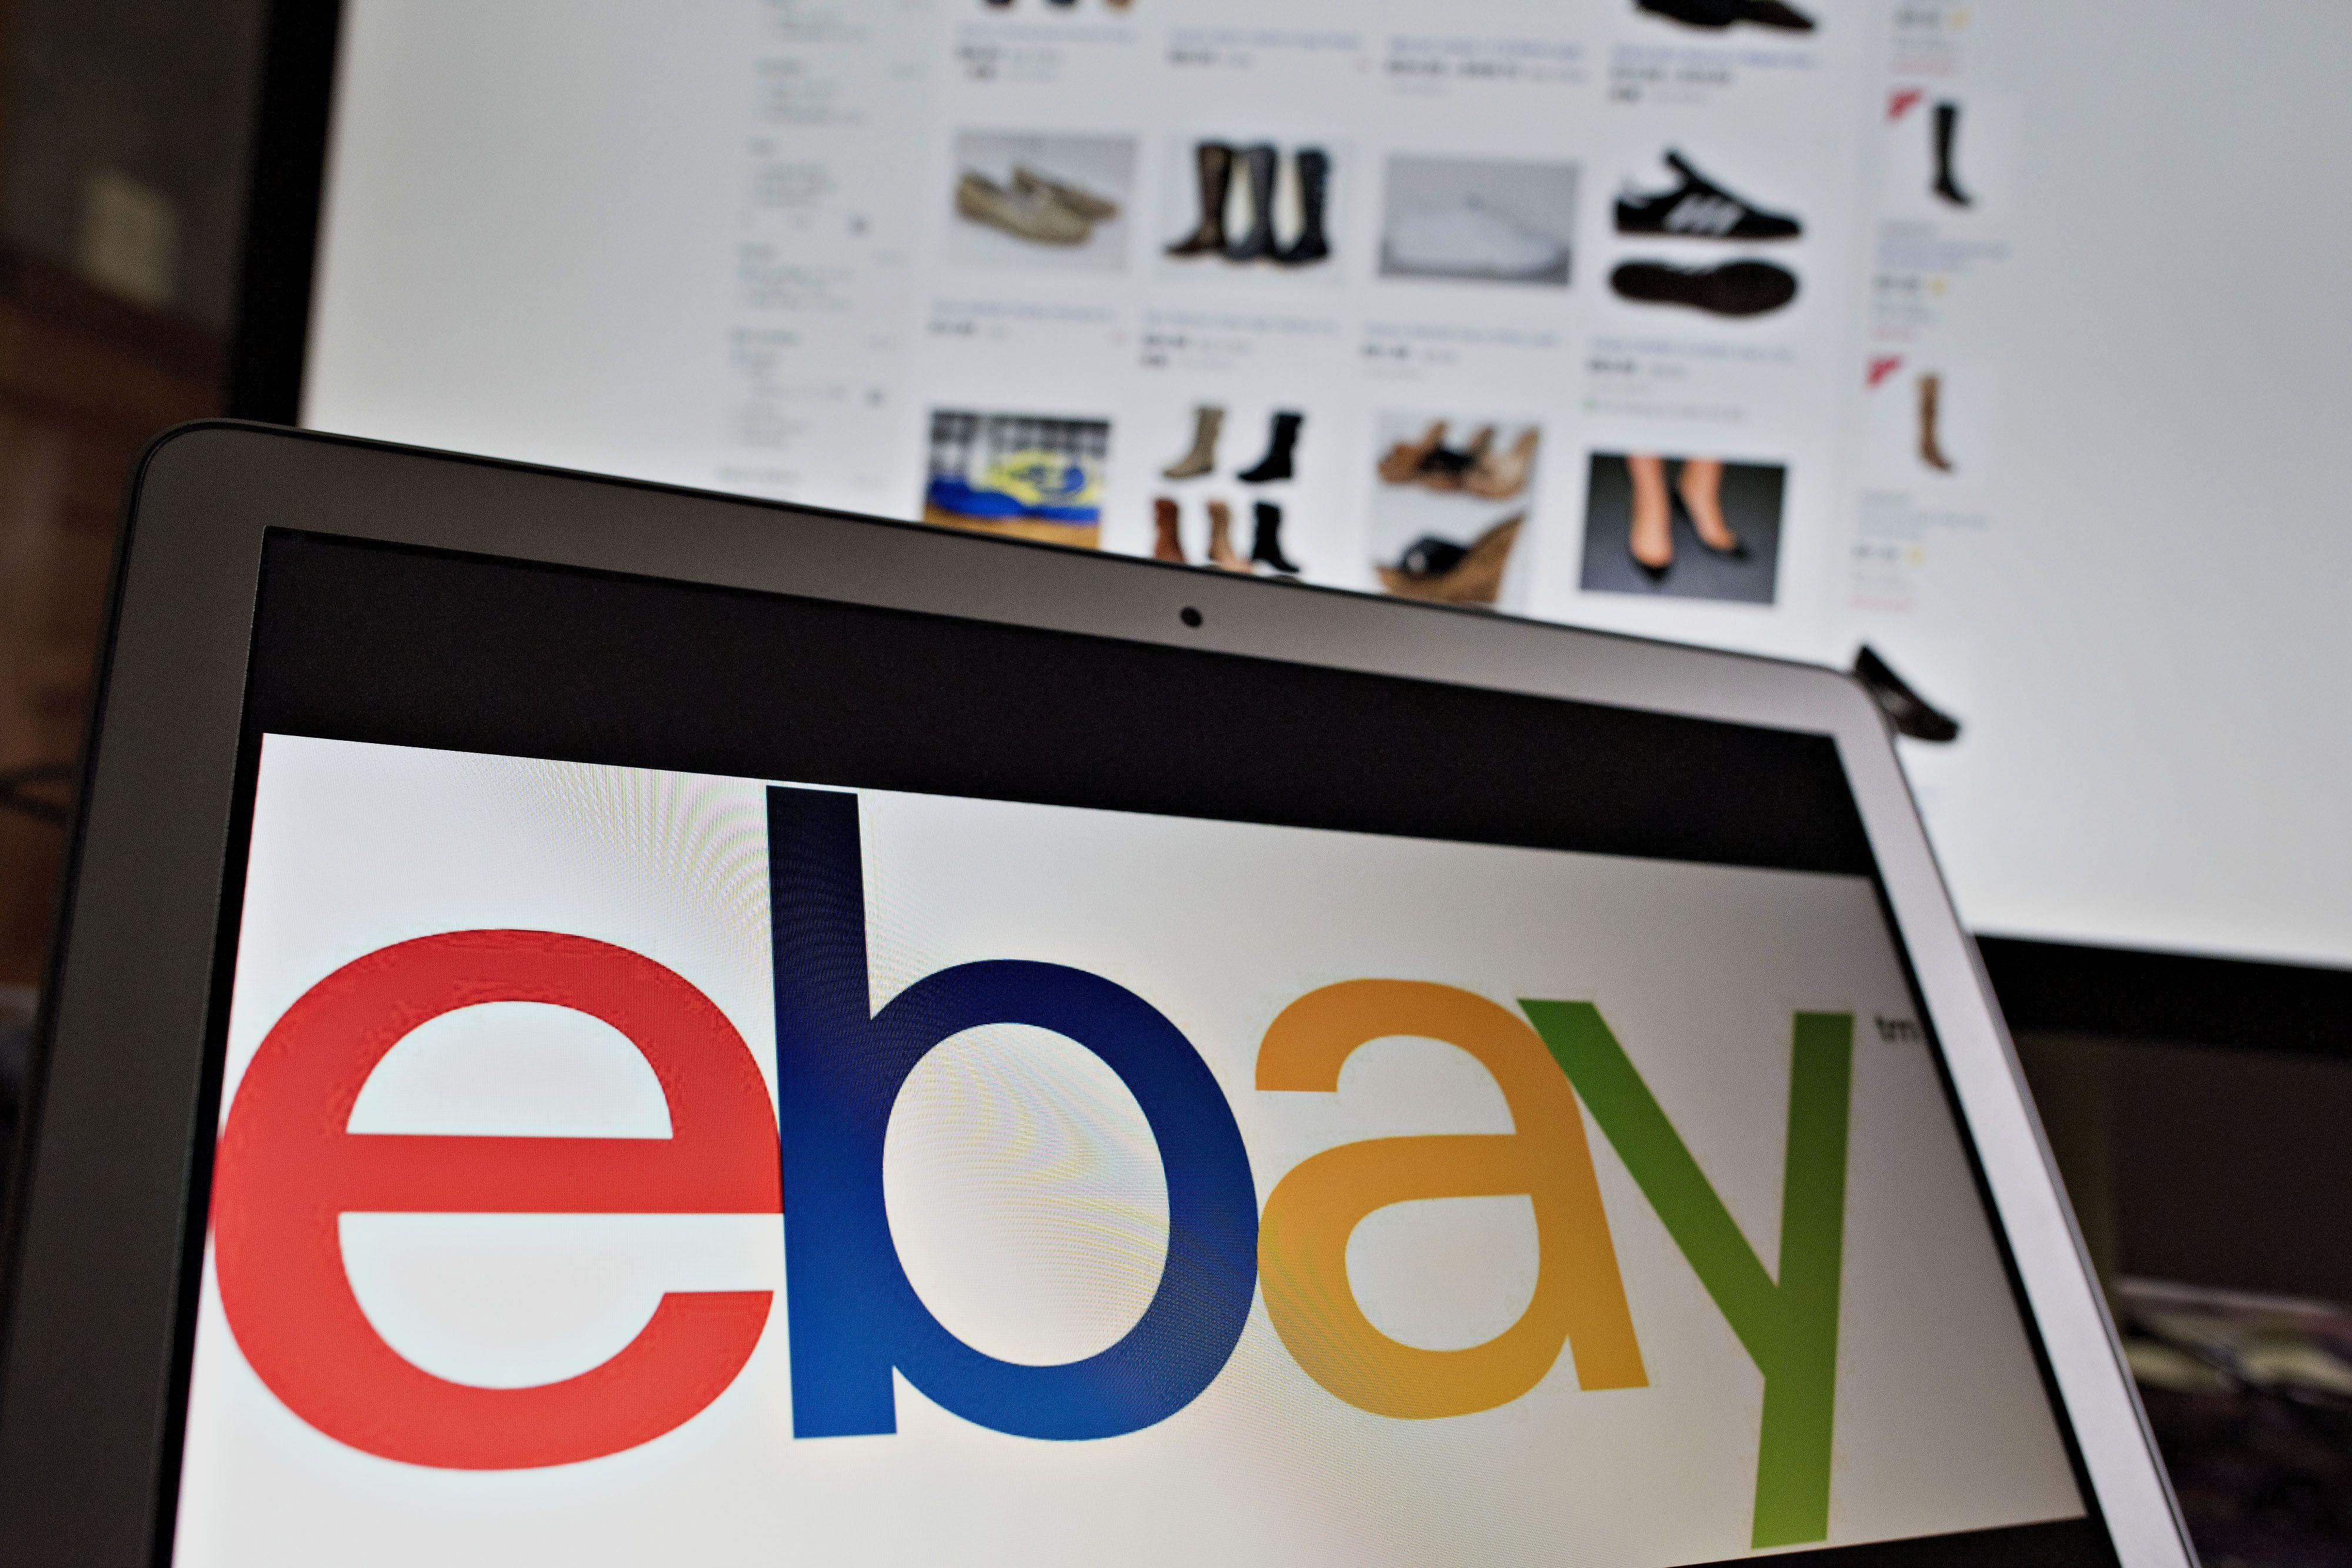 eBay Inc. Logo - eBay: Using Mobile App Can Help Users Sell Items | Time